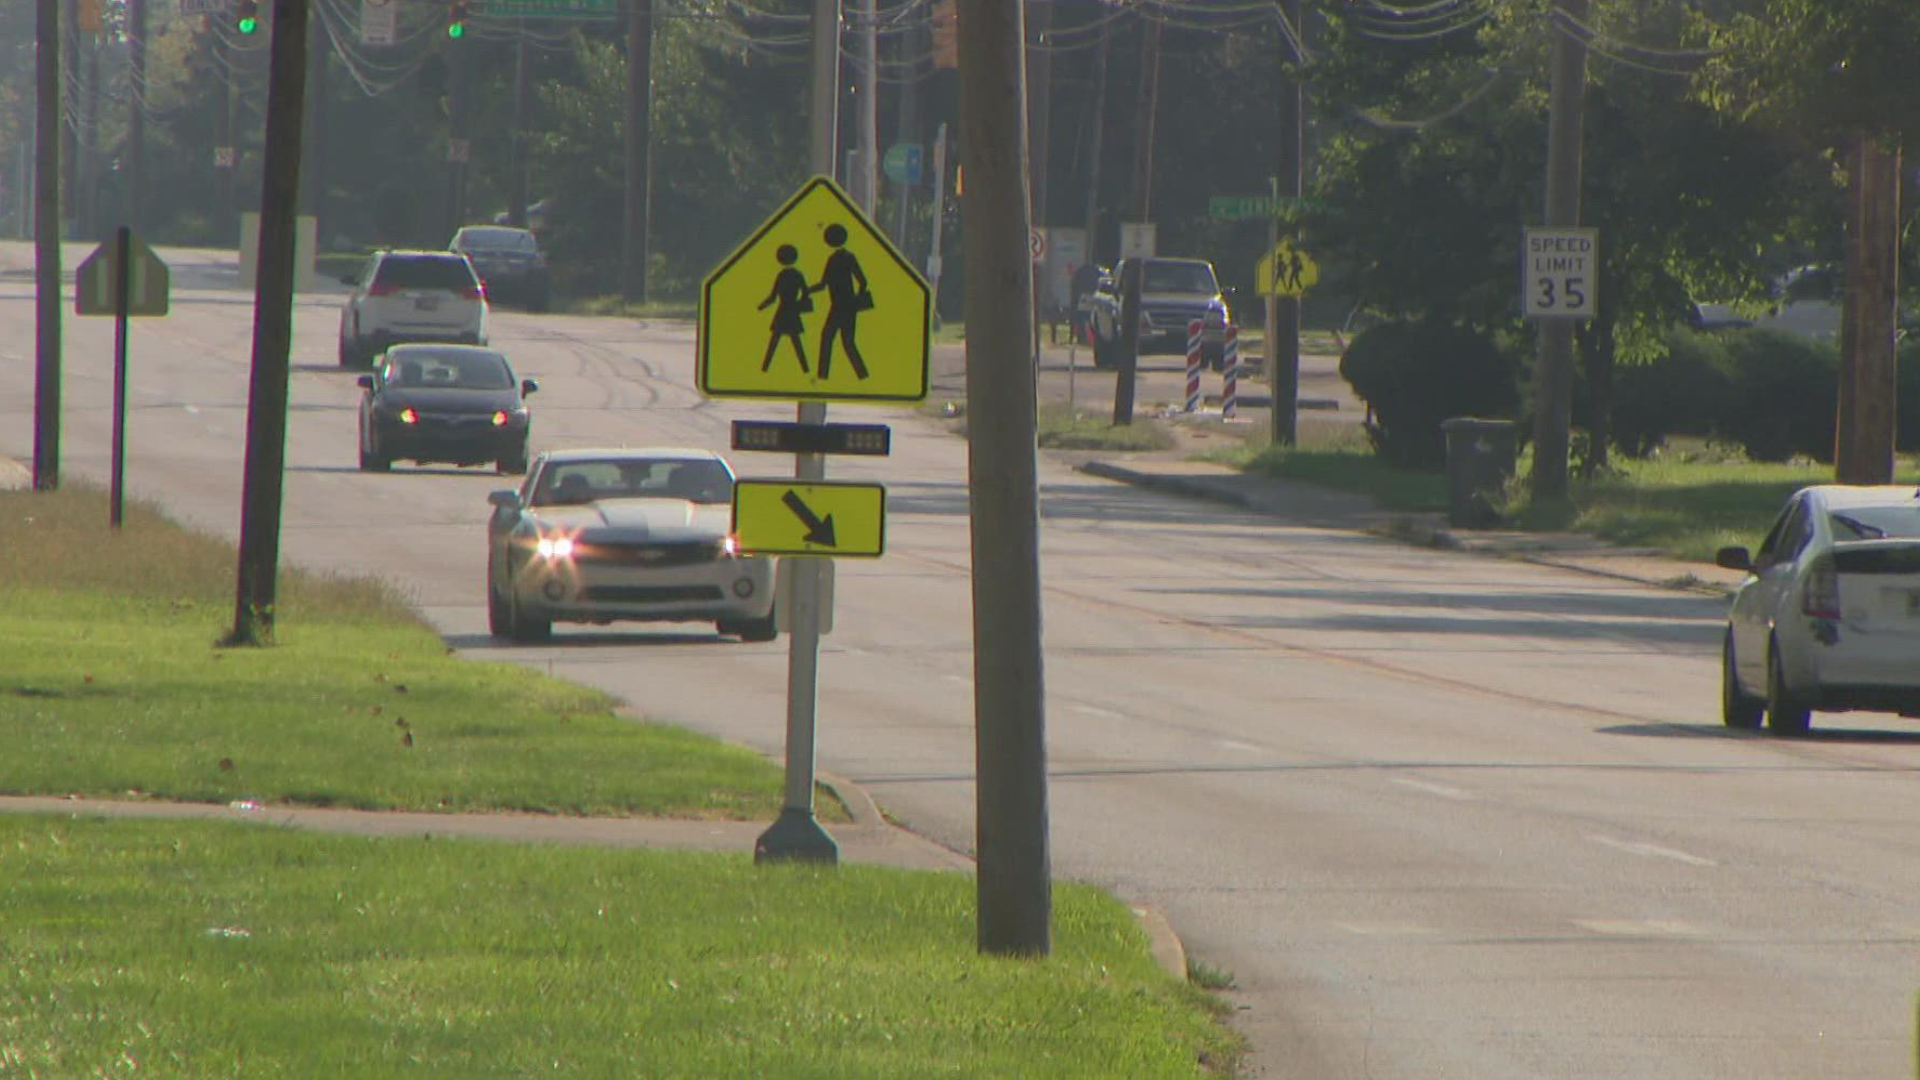 IMPD is also targeting areas around the city where incidents of speeding and reckless driving are being reported.